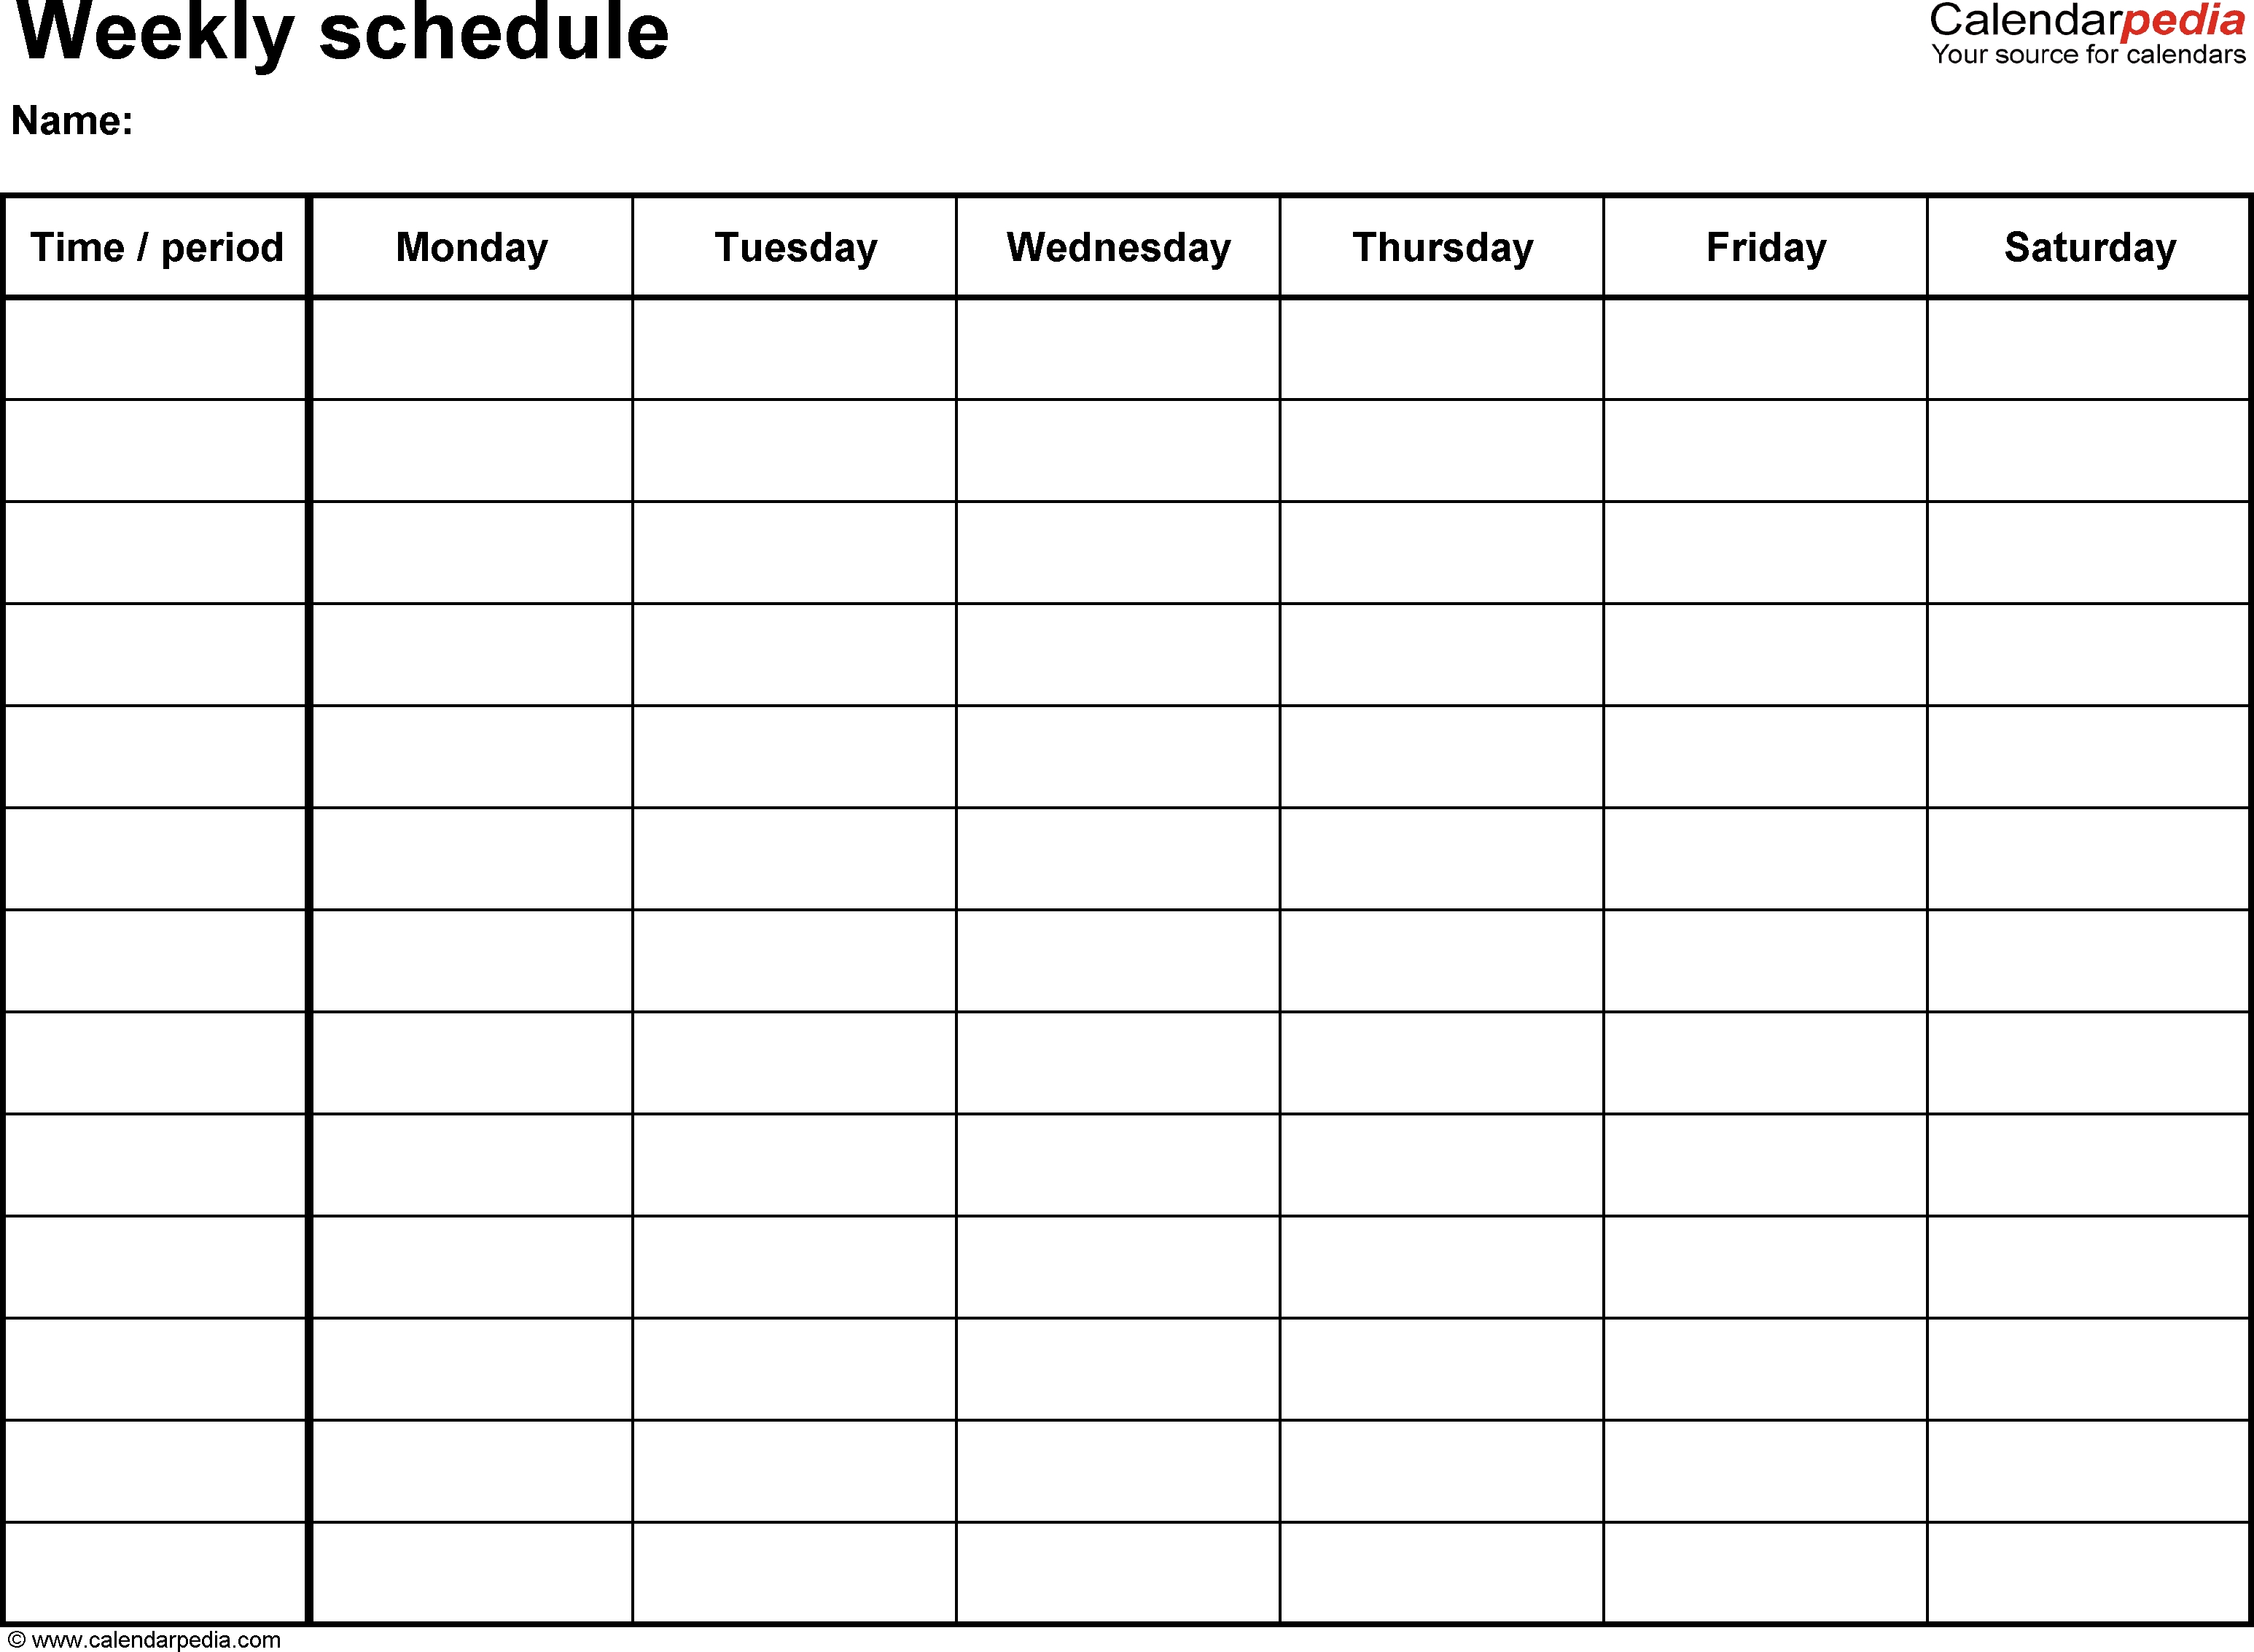 Free Weekly Schedule Templates For Excel - 18 Templates Week Of Calendar Template